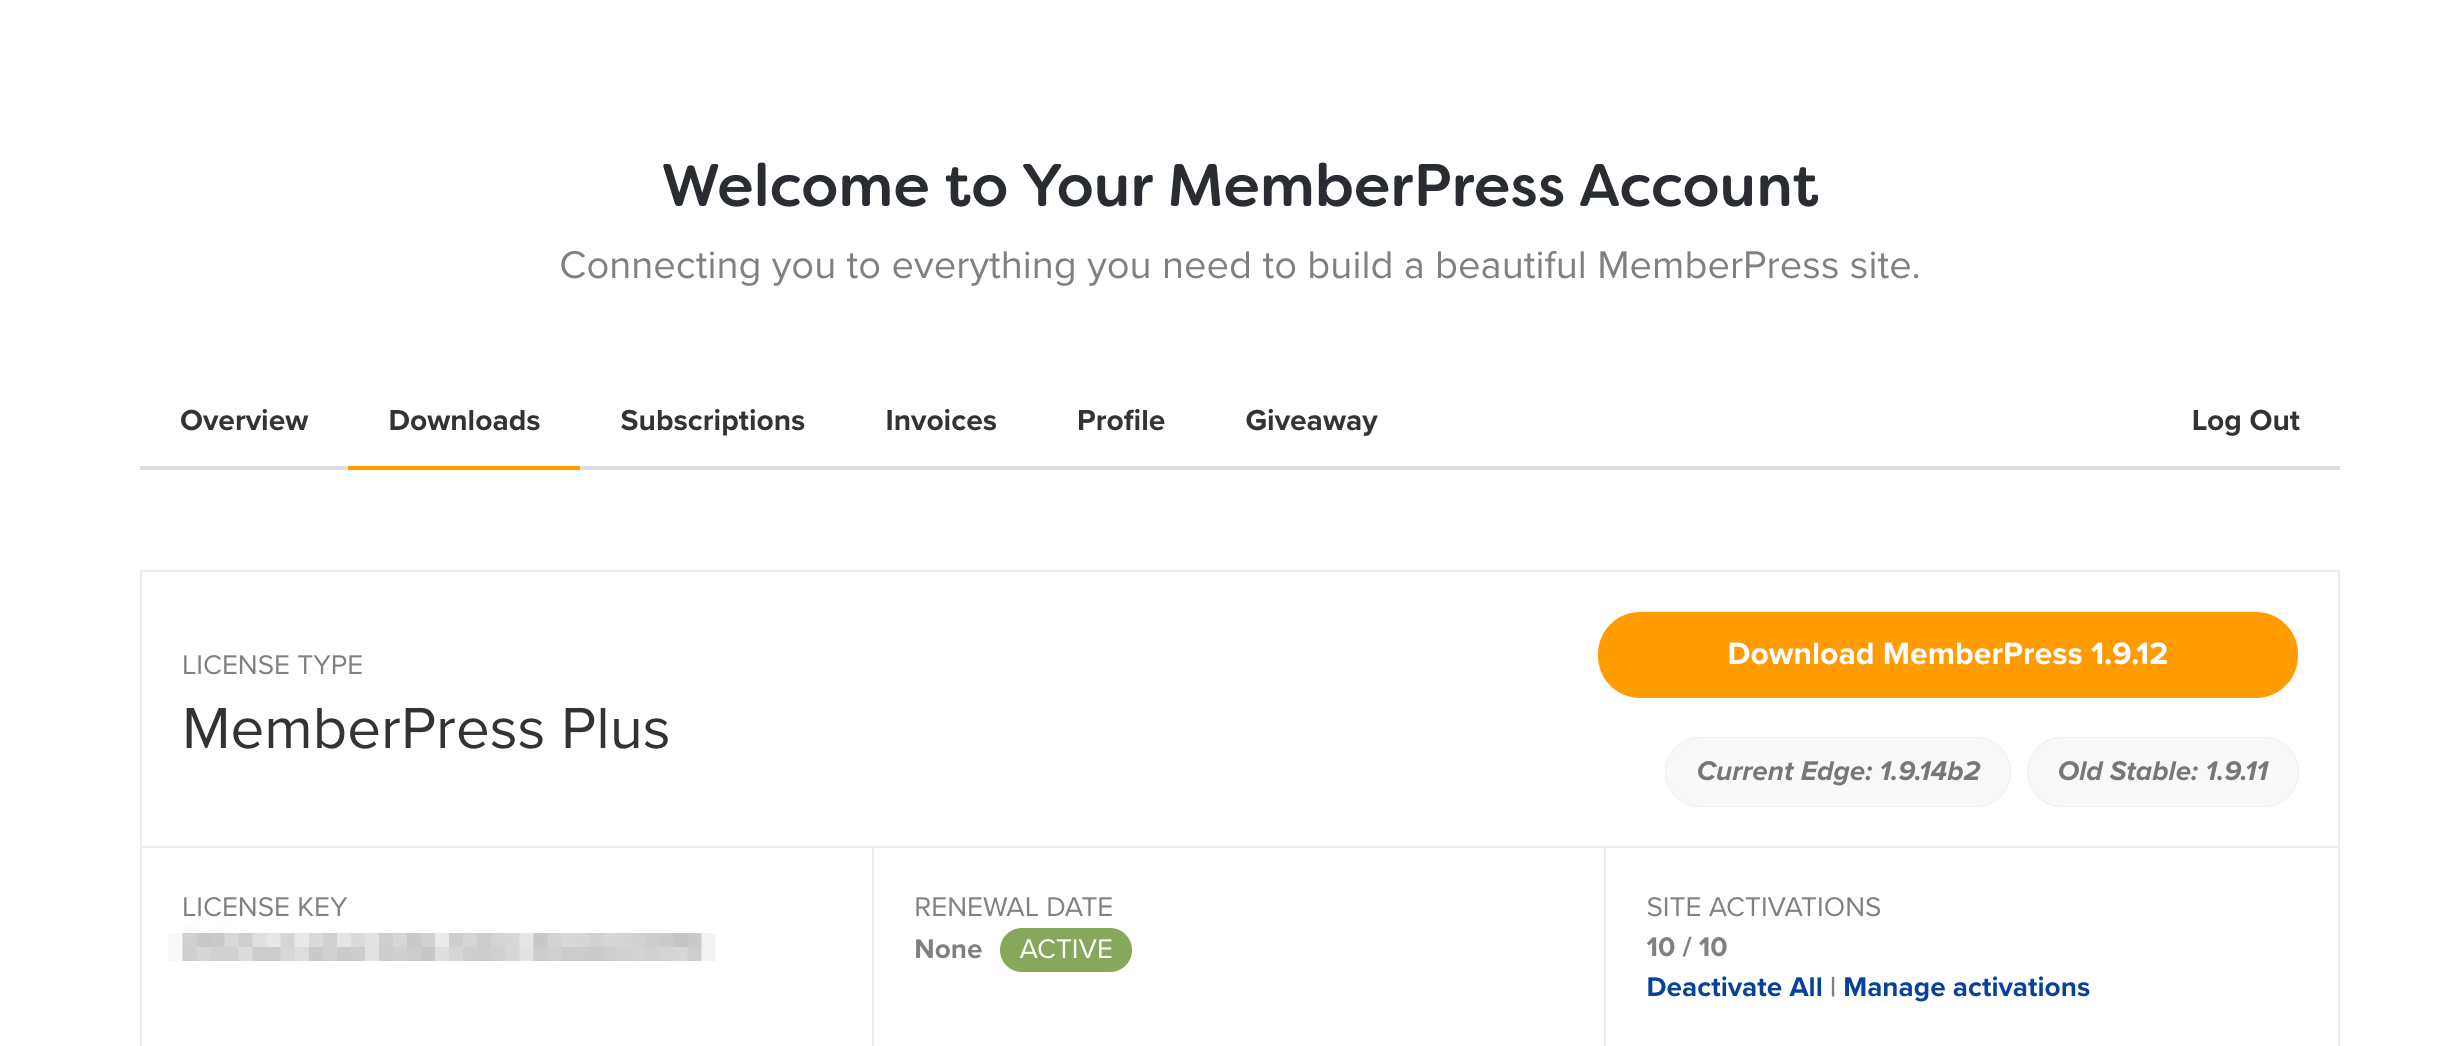 Downloading MemberPress from the Account page.